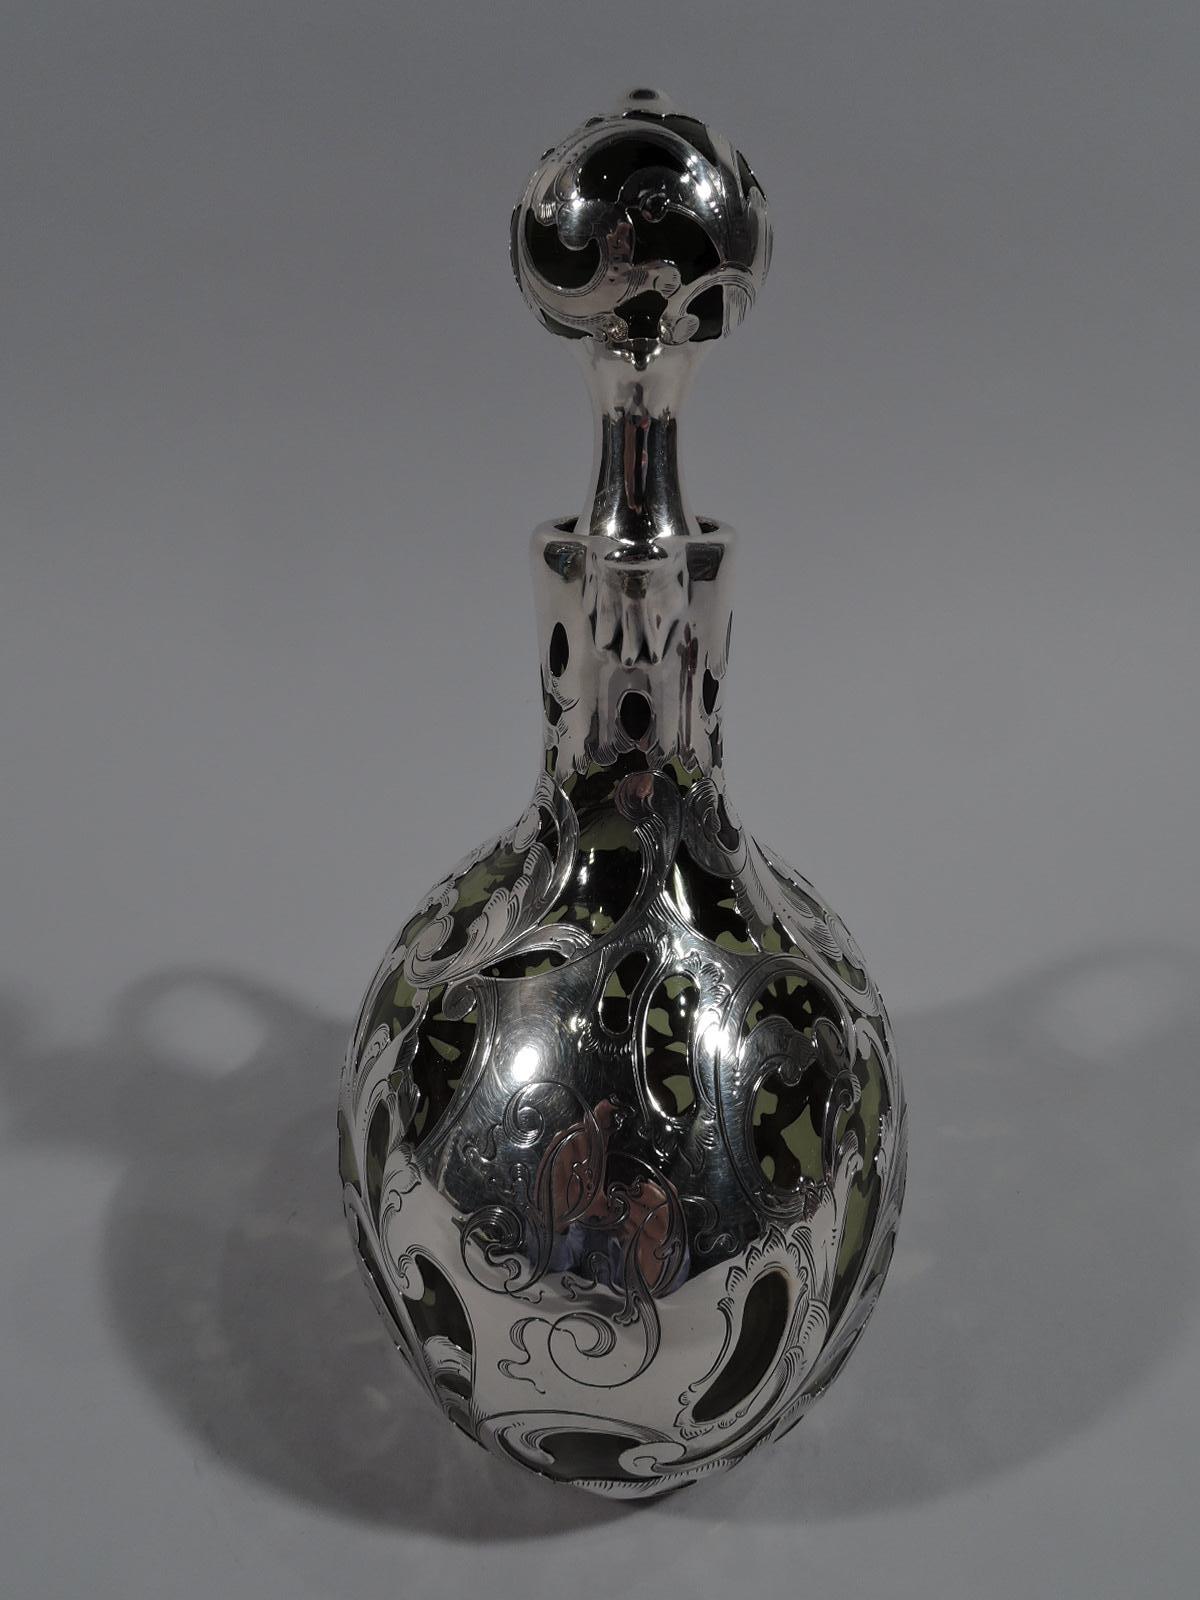 Turn-of-the-century Art Nouveau glass decanter with engraved silver overlay. Curved ovalish body with high looping reeded handle and cylindrical neck. Ball stopper. Overlay in form of loose and exuberant scrolls and flowers. On front asymmetrical